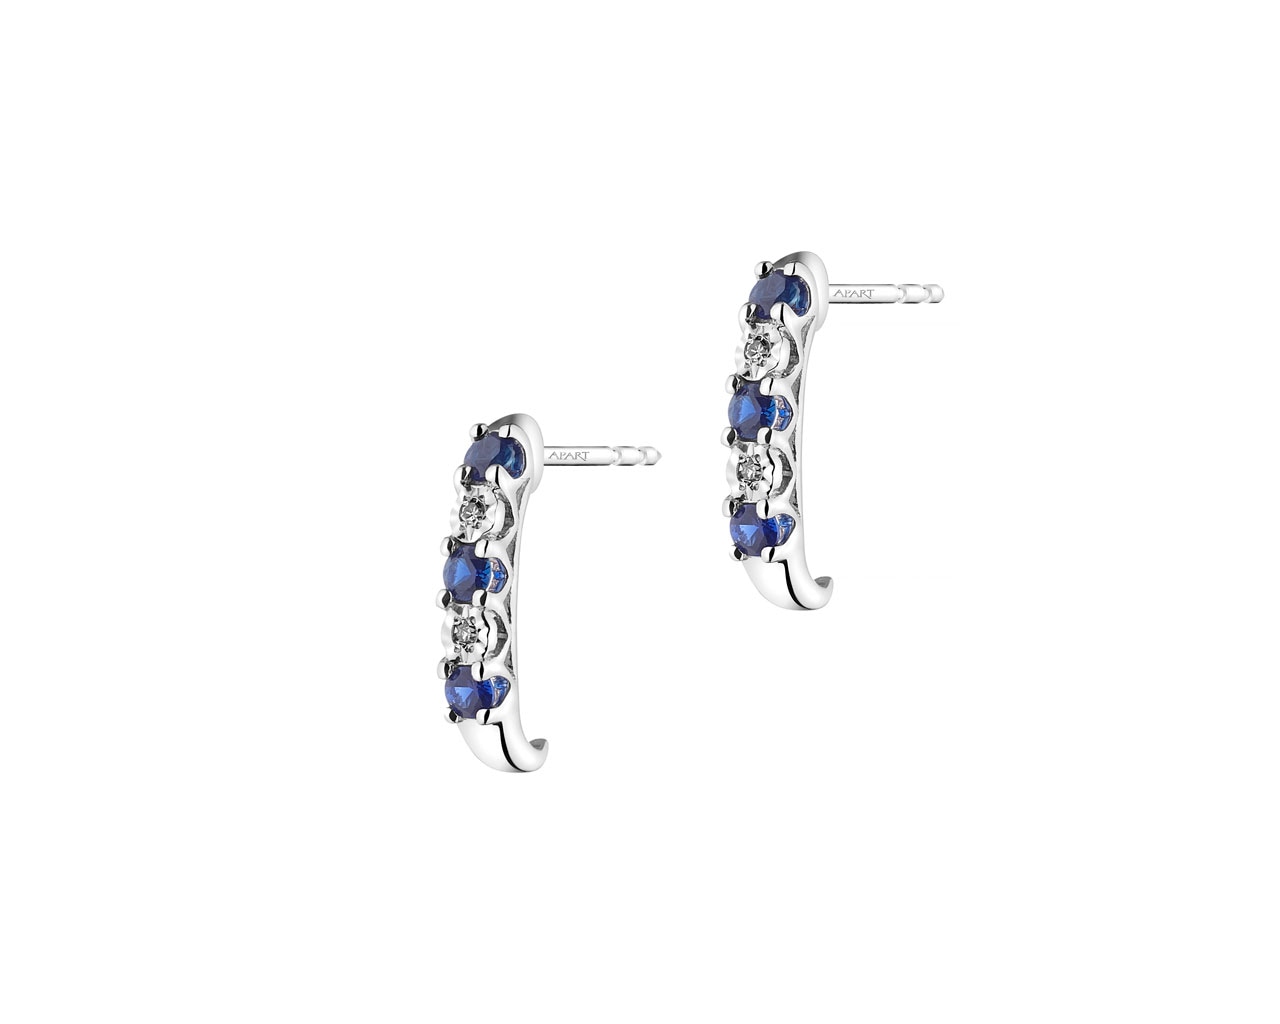 9ct White Gold Earrings with Diamonds 0,01 ct - fineness 14 K